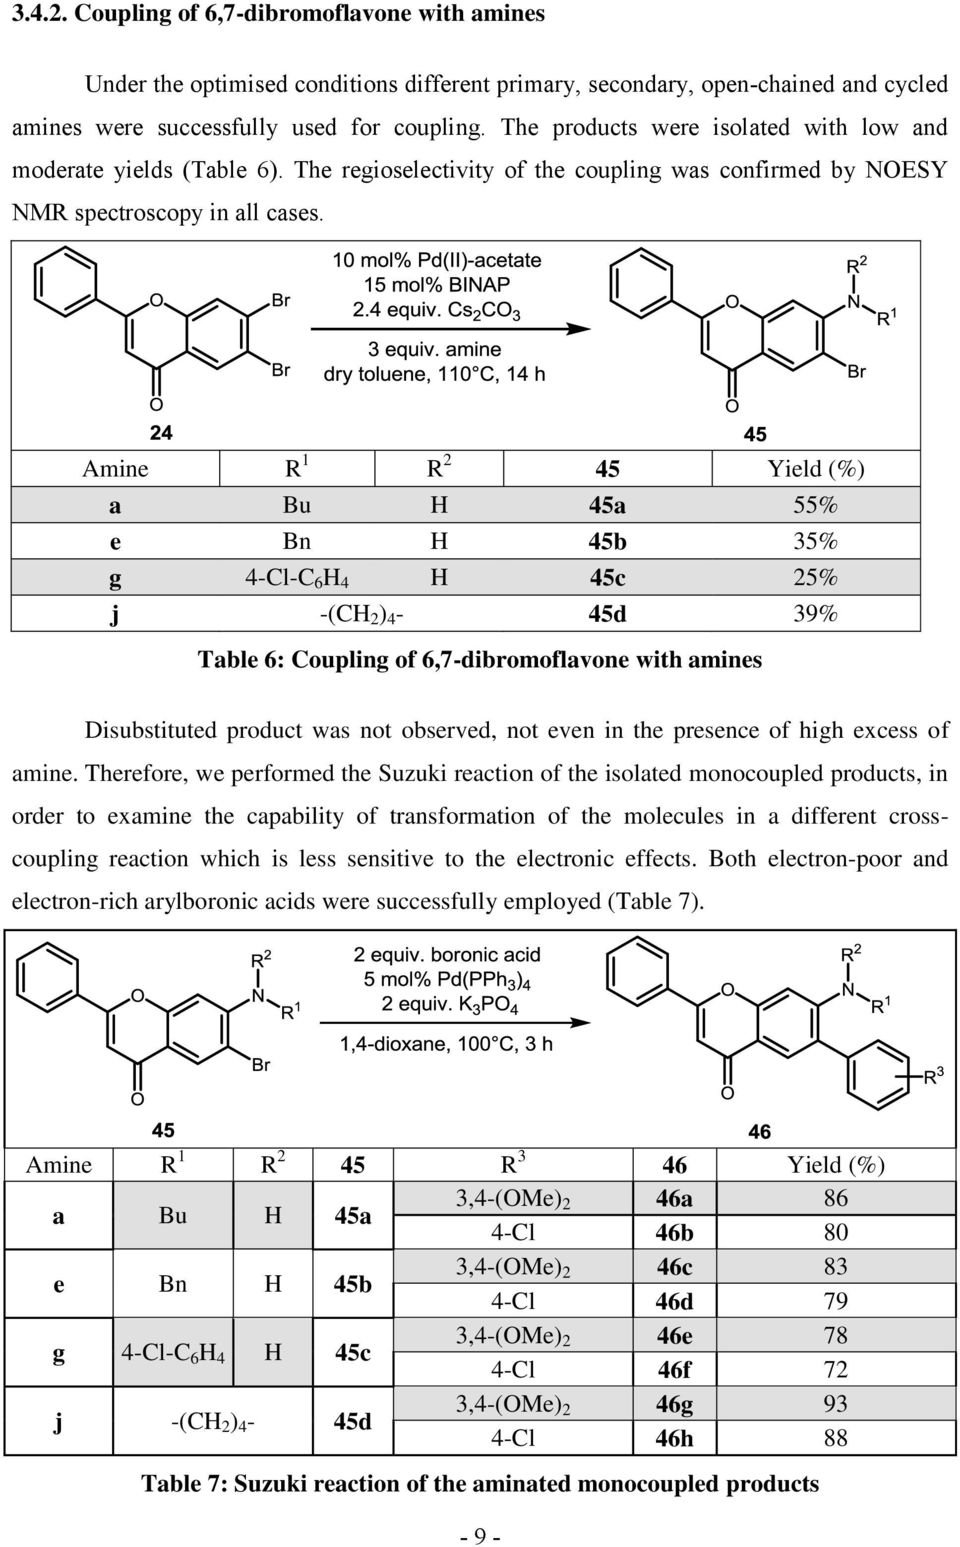 R1 R2 Bu Bn 4-Cl-C64 -(C2)4- Amine a e g j Yield (%) 55% 35% 25% 39% 45 45a 45b 45c 45d Table 6: Coupling of 6,7-dibromoflavone with amines Disubstituted product was not observed, not even in the